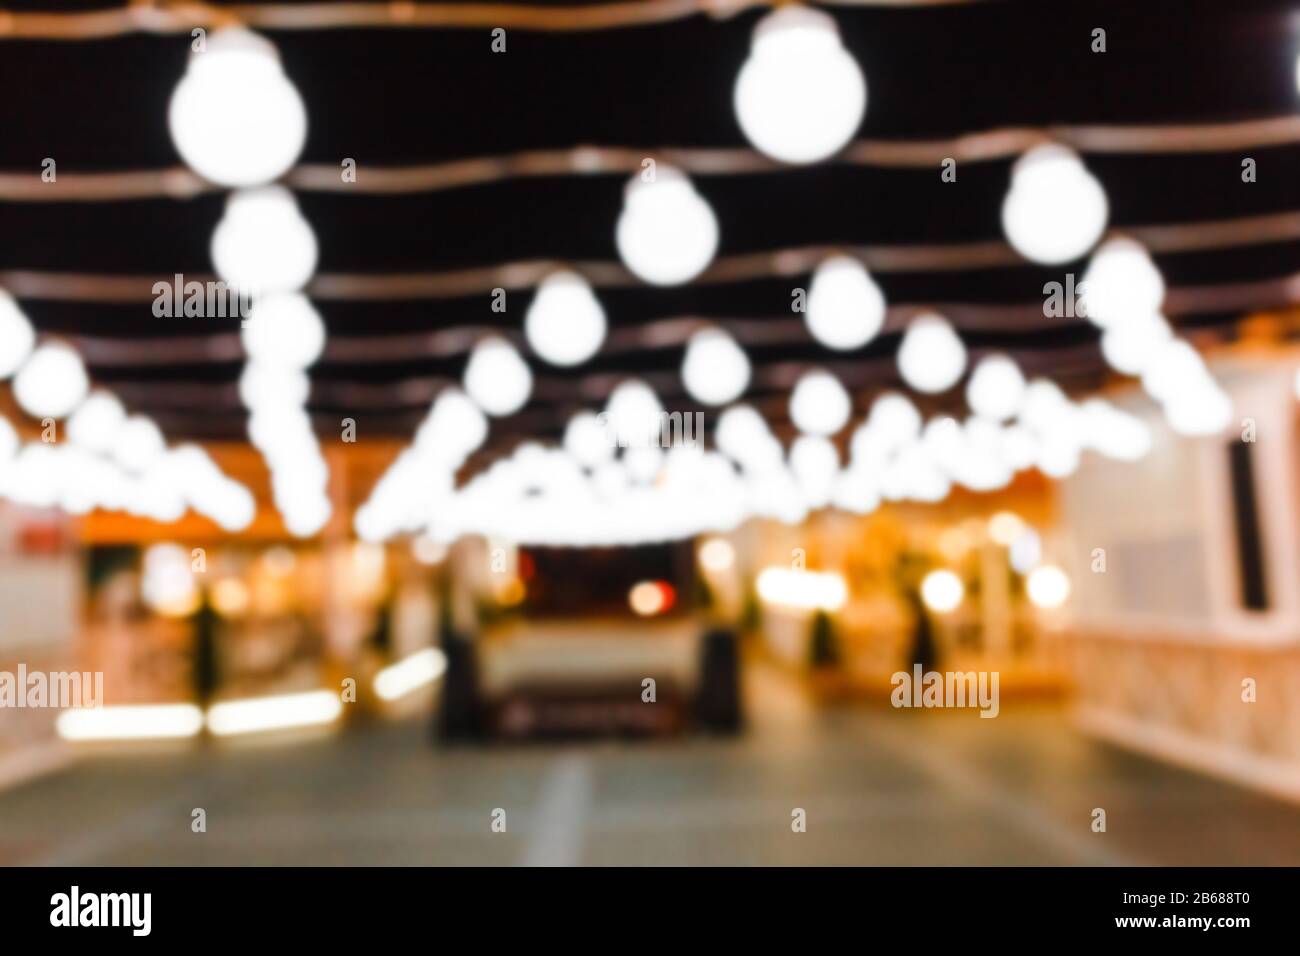 Outdoor Summer Urban Cafe With Bulb Lights Background Stock Photo Alamy